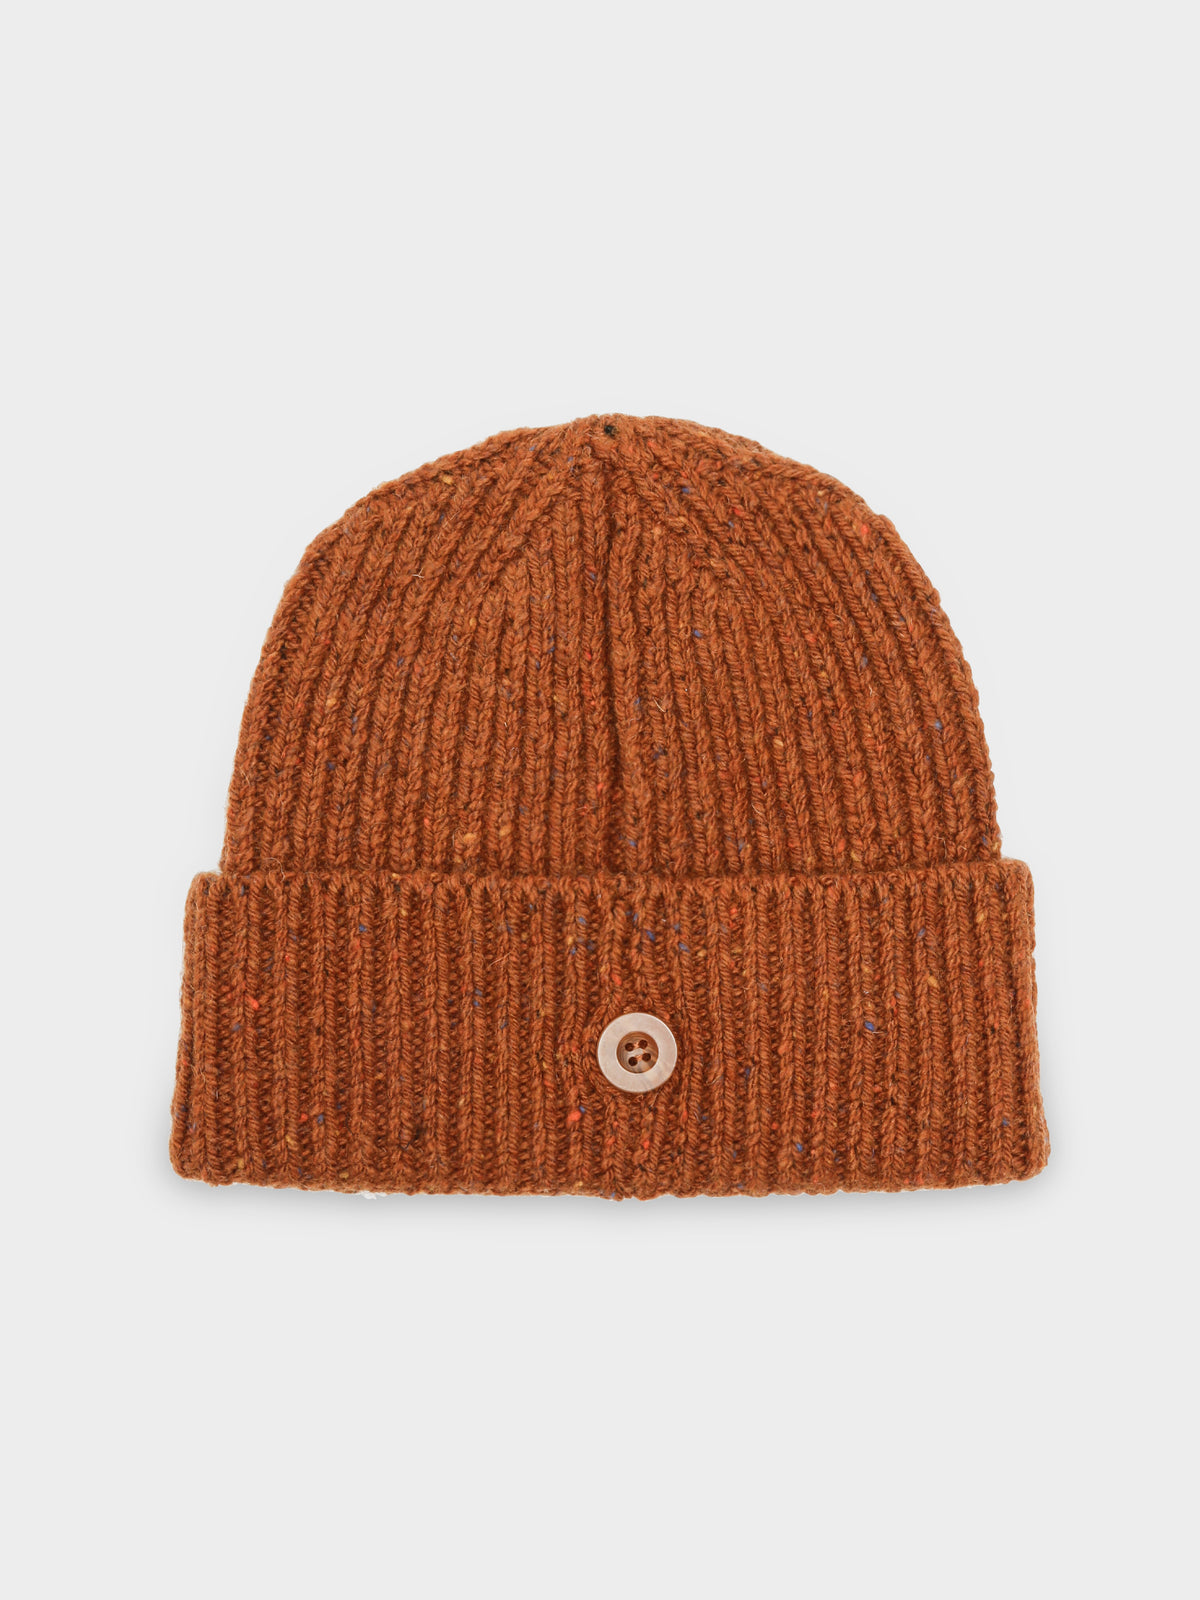 Anglistic Beanie in Brandy Heather